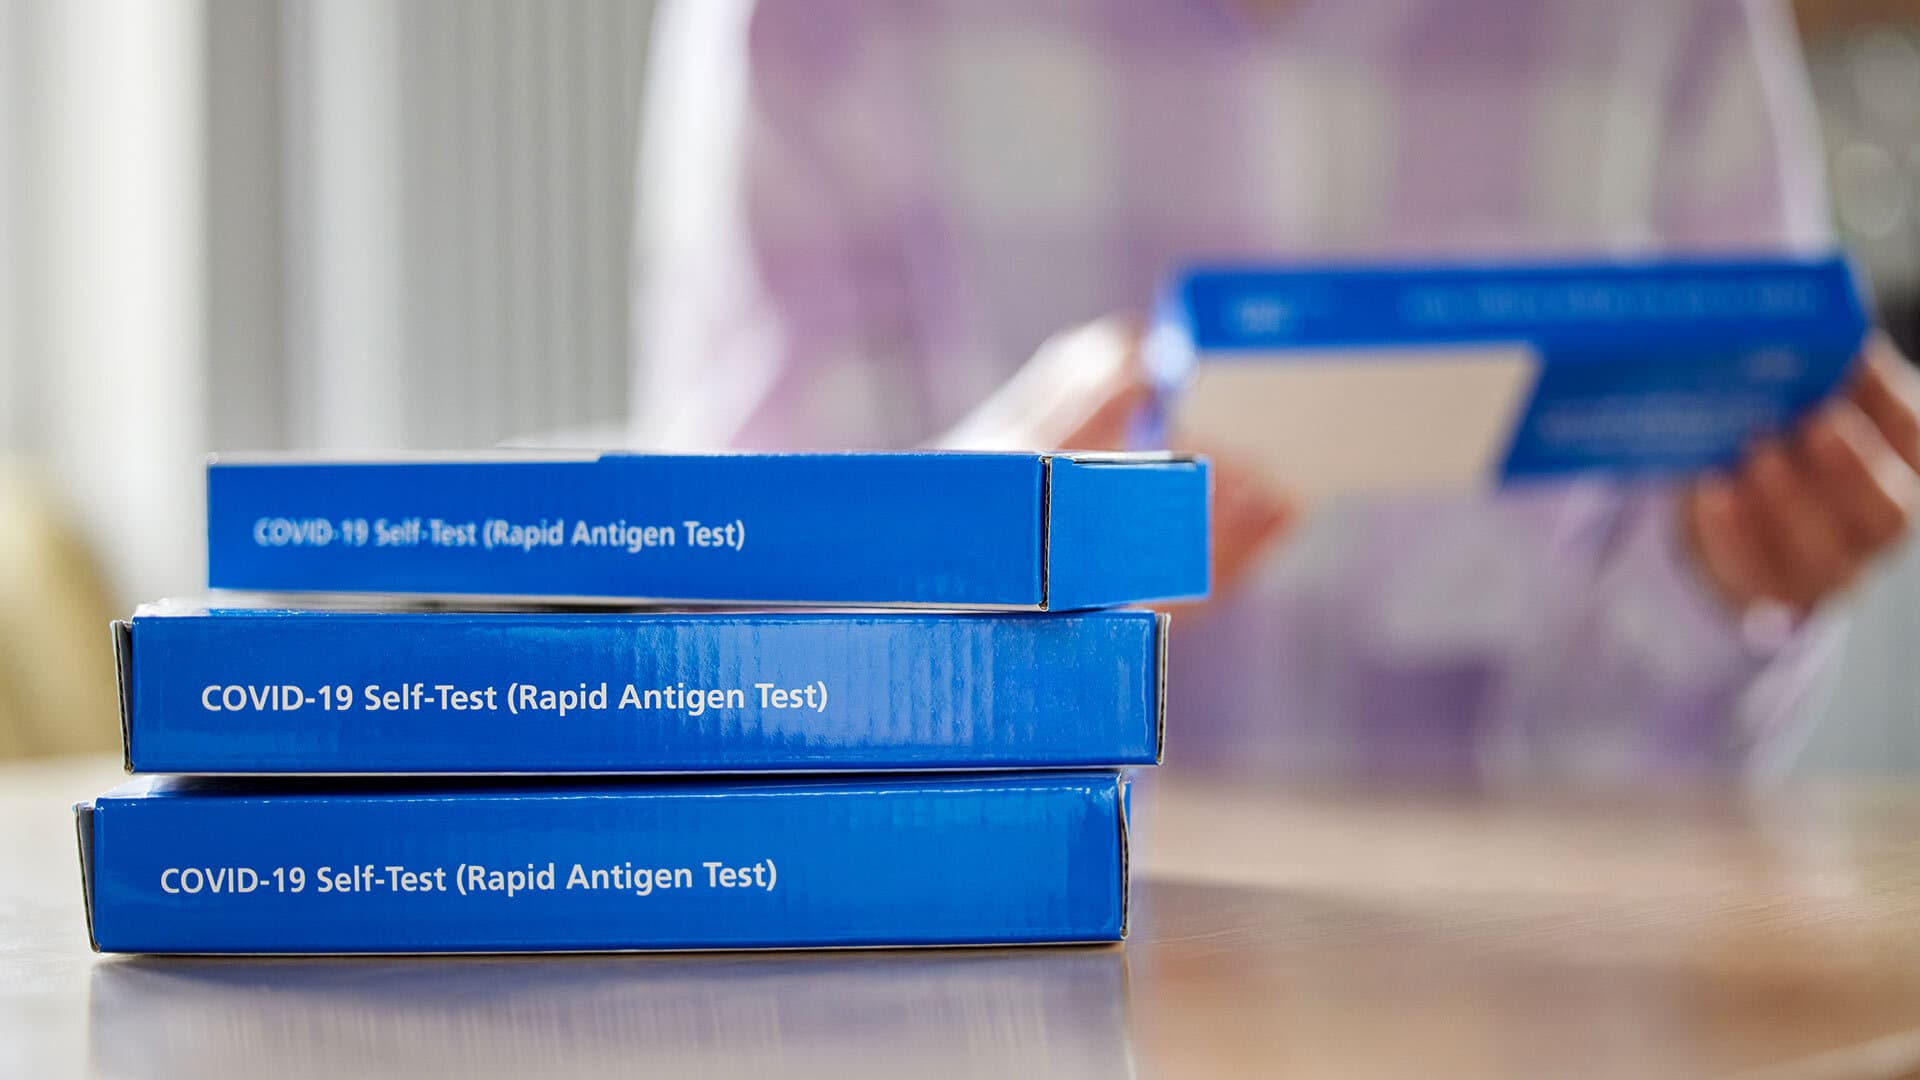 boxes of COVID-19 self-tests (rapid antigen tests)